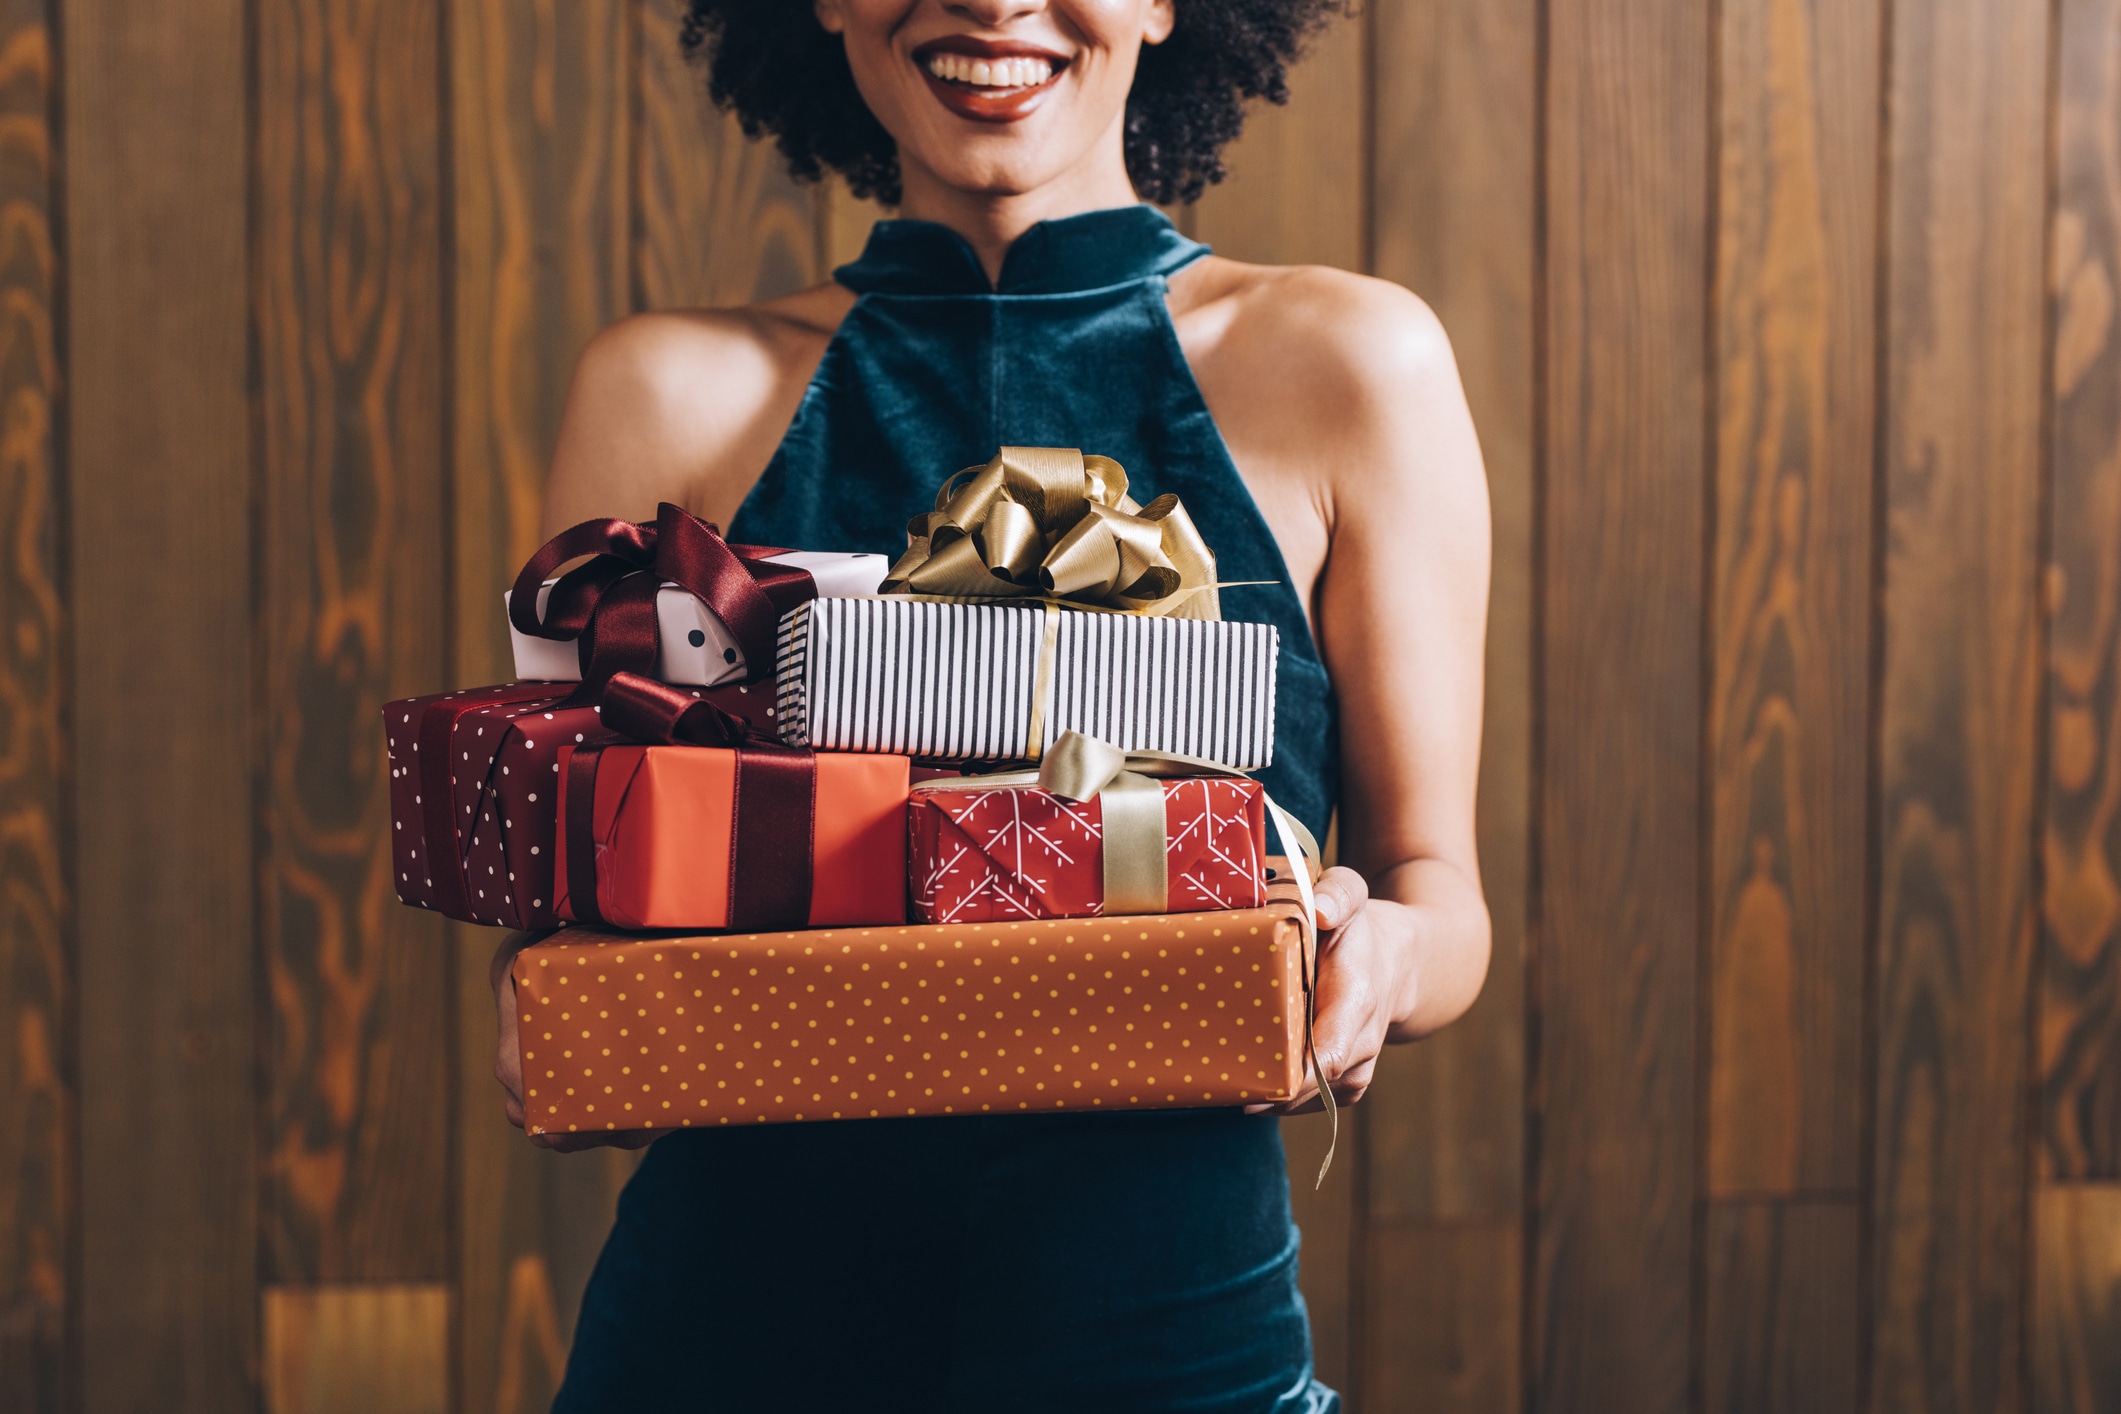 Merry Christmas: a n Anonymous Smiling Elegant African American Woman Holding a Pile of Presents in her Hands, a Close Up